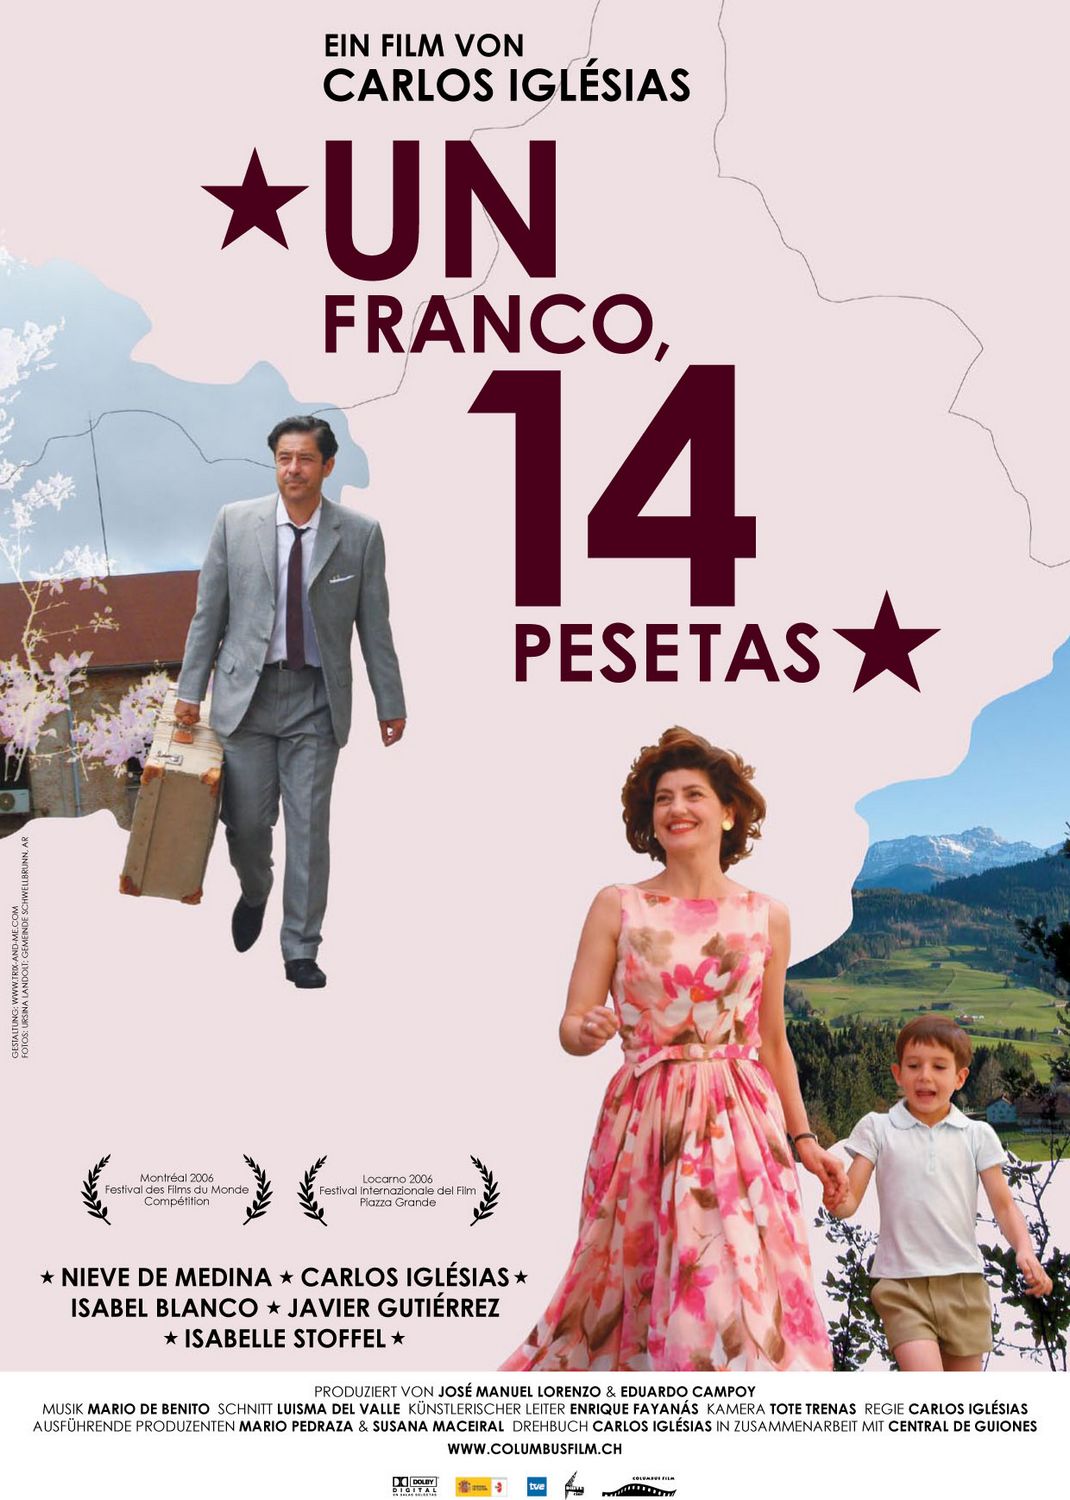 Extra Large Movie Poster Image for Franco, 14 pesetas, Un 